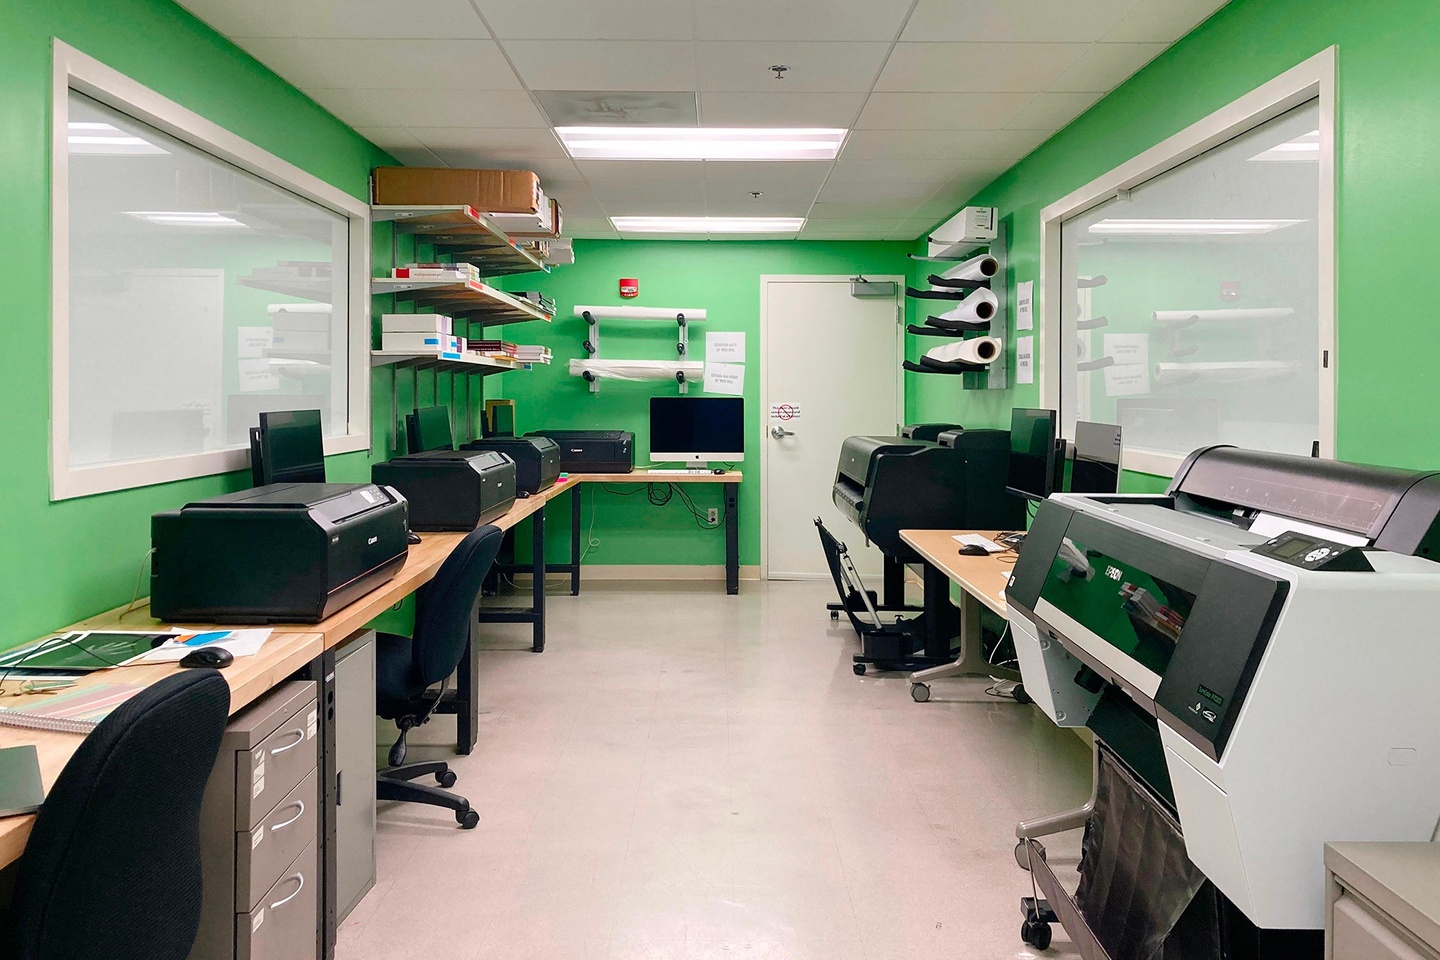 Room with bright green walls and long tables on each side with several printers sitting on top.